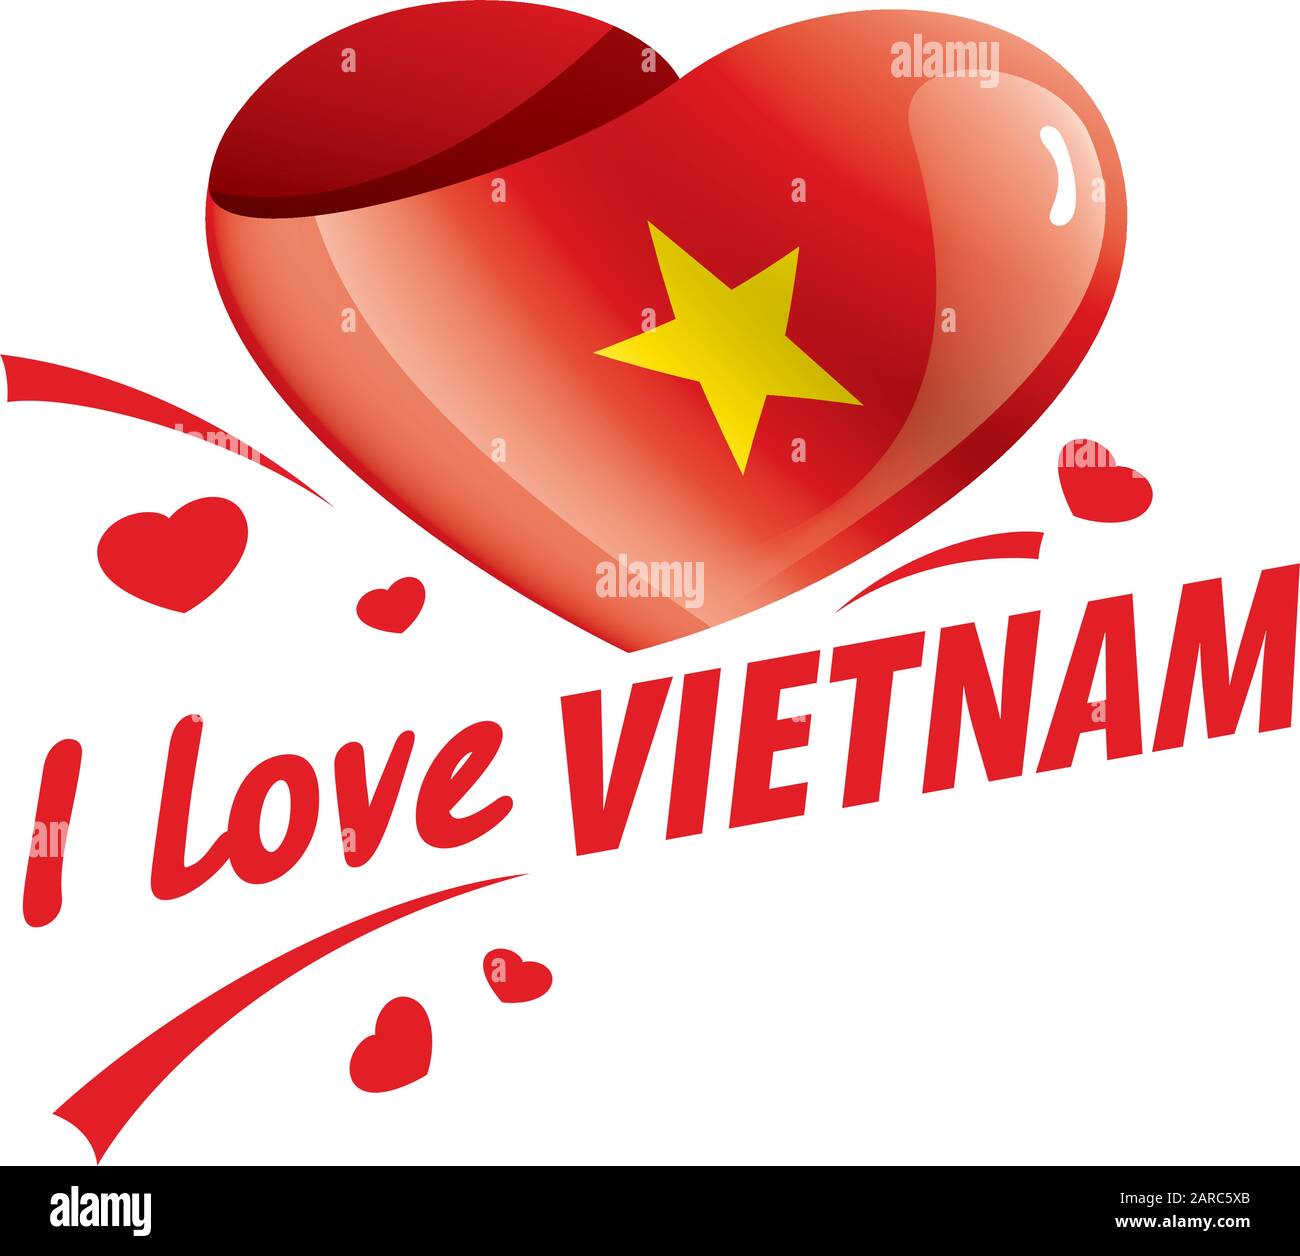 I Love Vietnam High Resolution Stock Photography and Images - Alamy